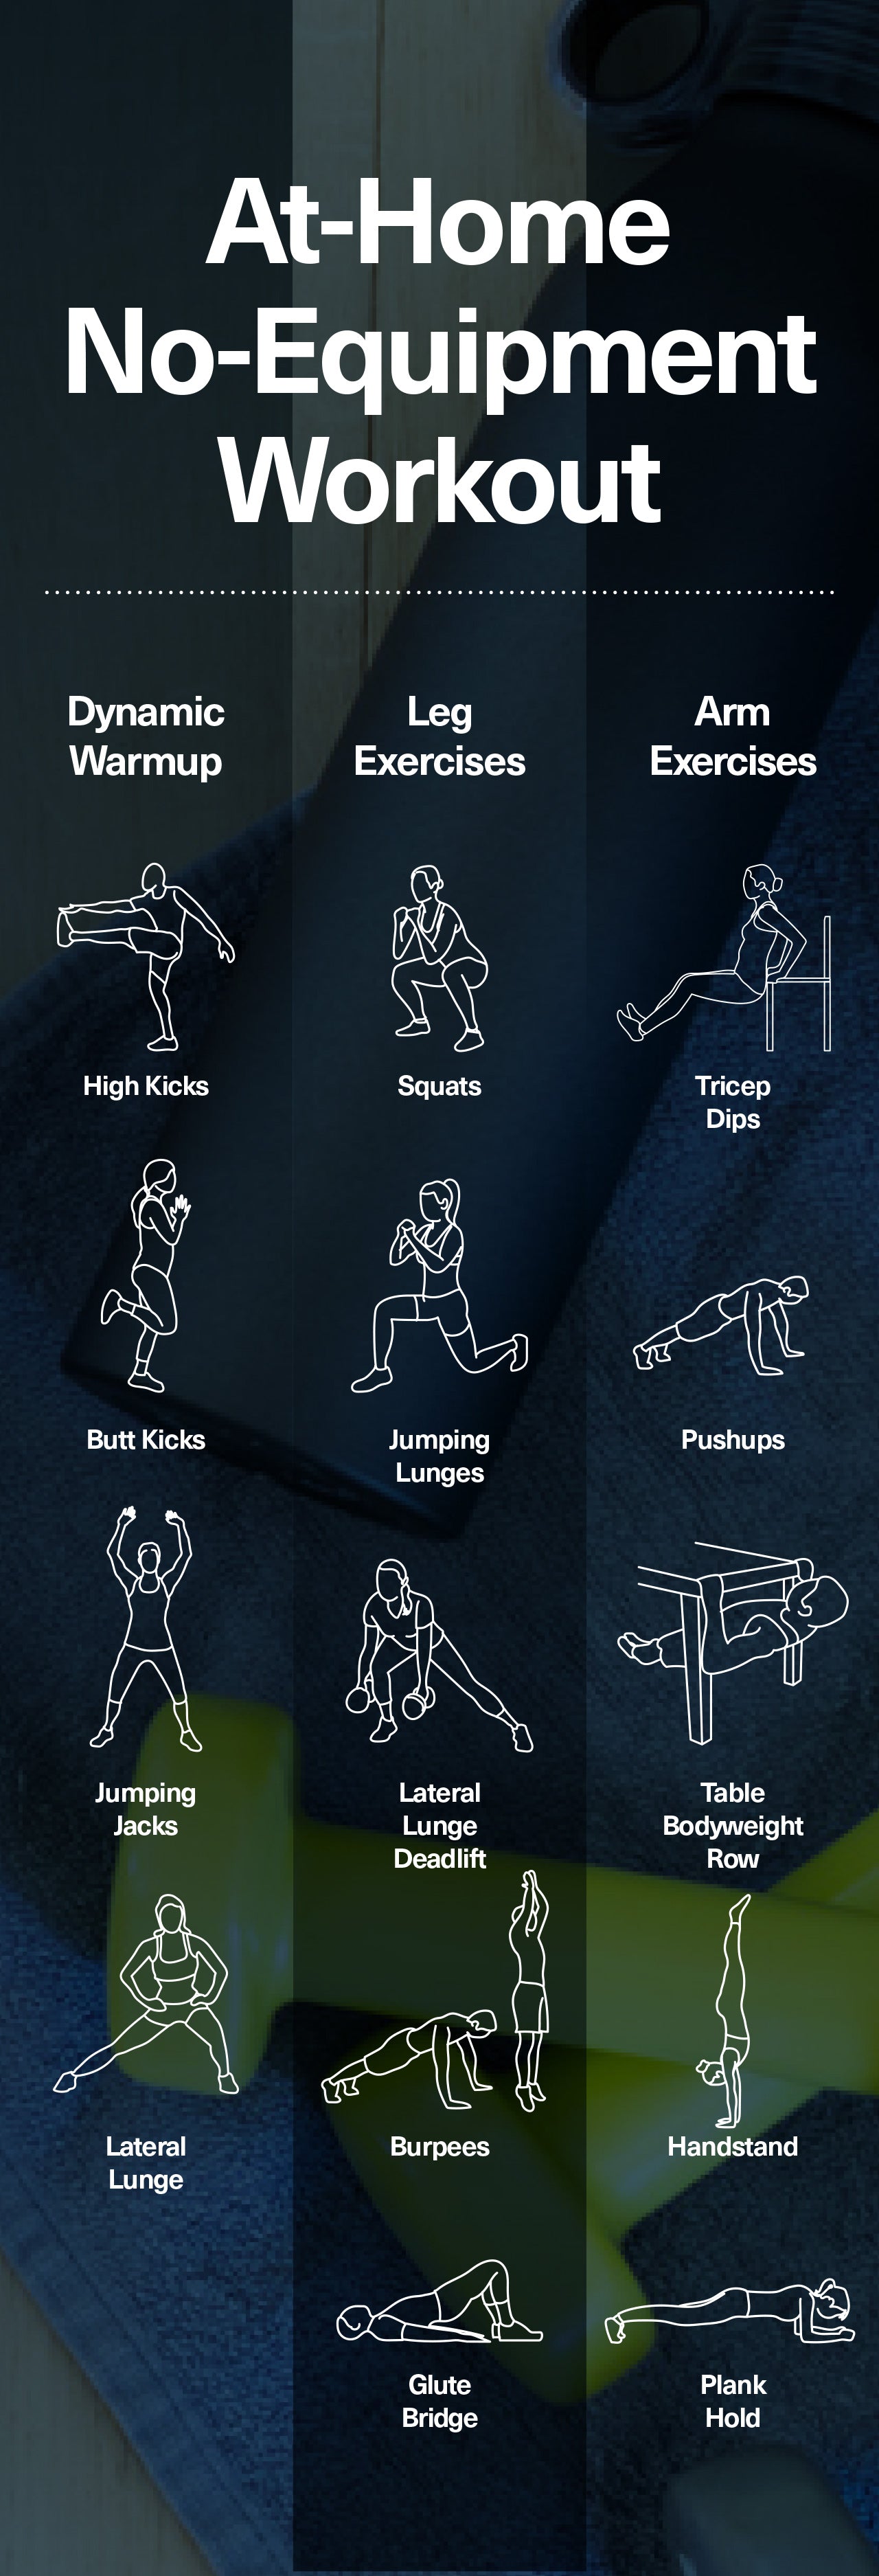 At-Home No-Equipment Workout